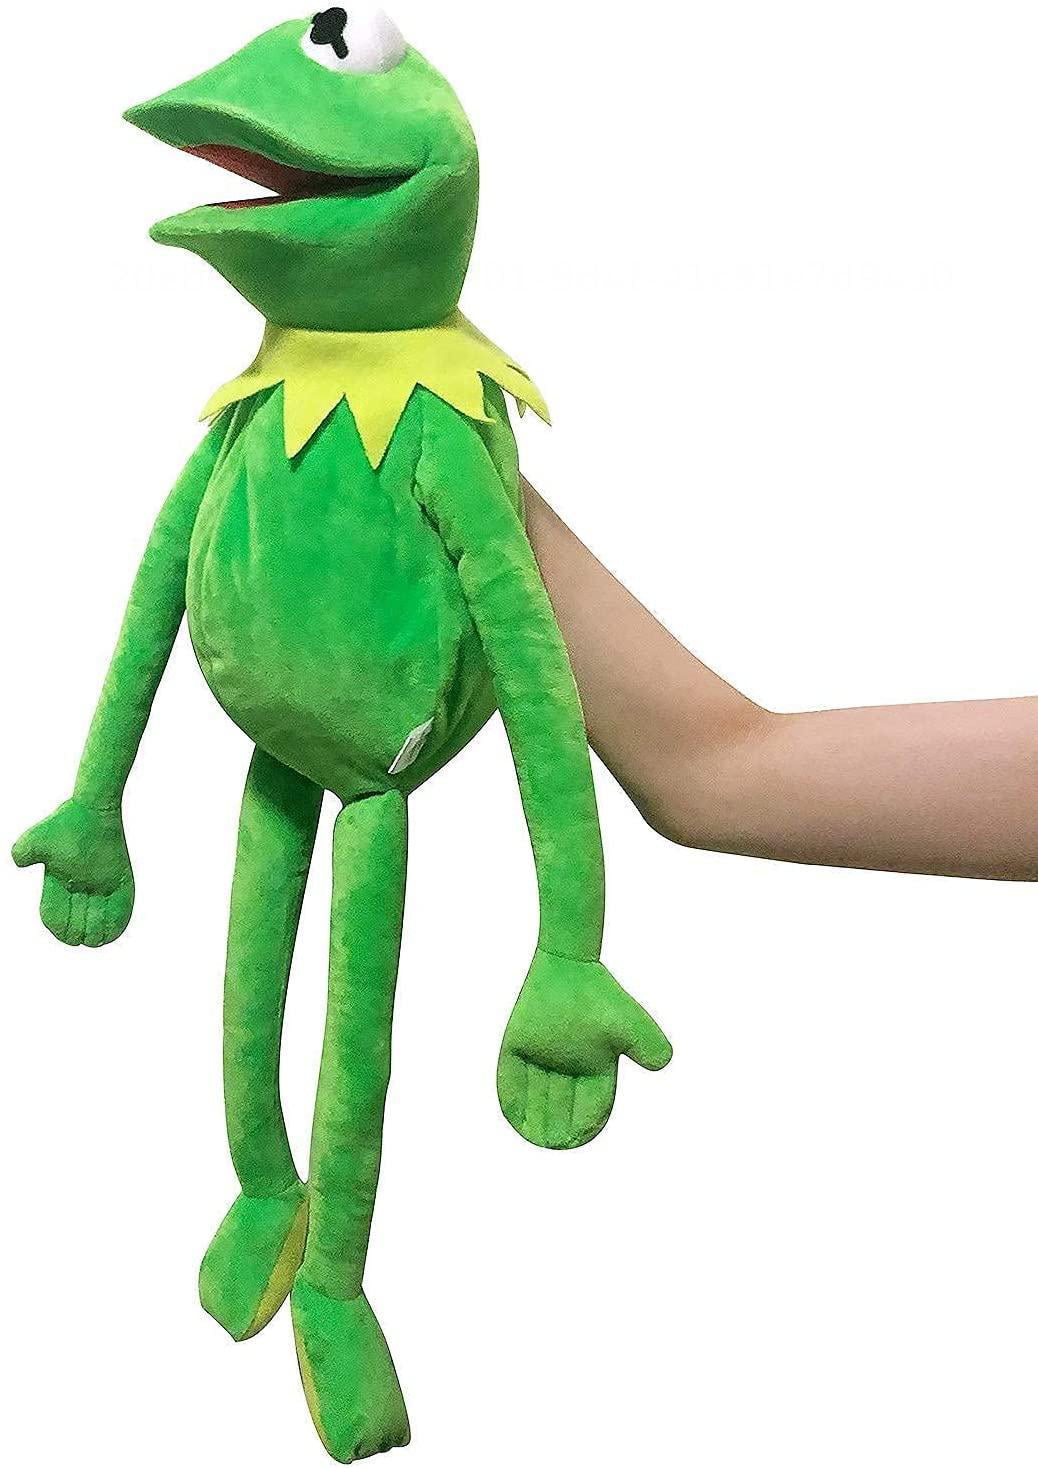 A Natseekgo 23.6 inch Frog Puppet Plush，Kermit The Frog Puppet Hand Puppet Full Body Christmas Birthday Gifts for Kids